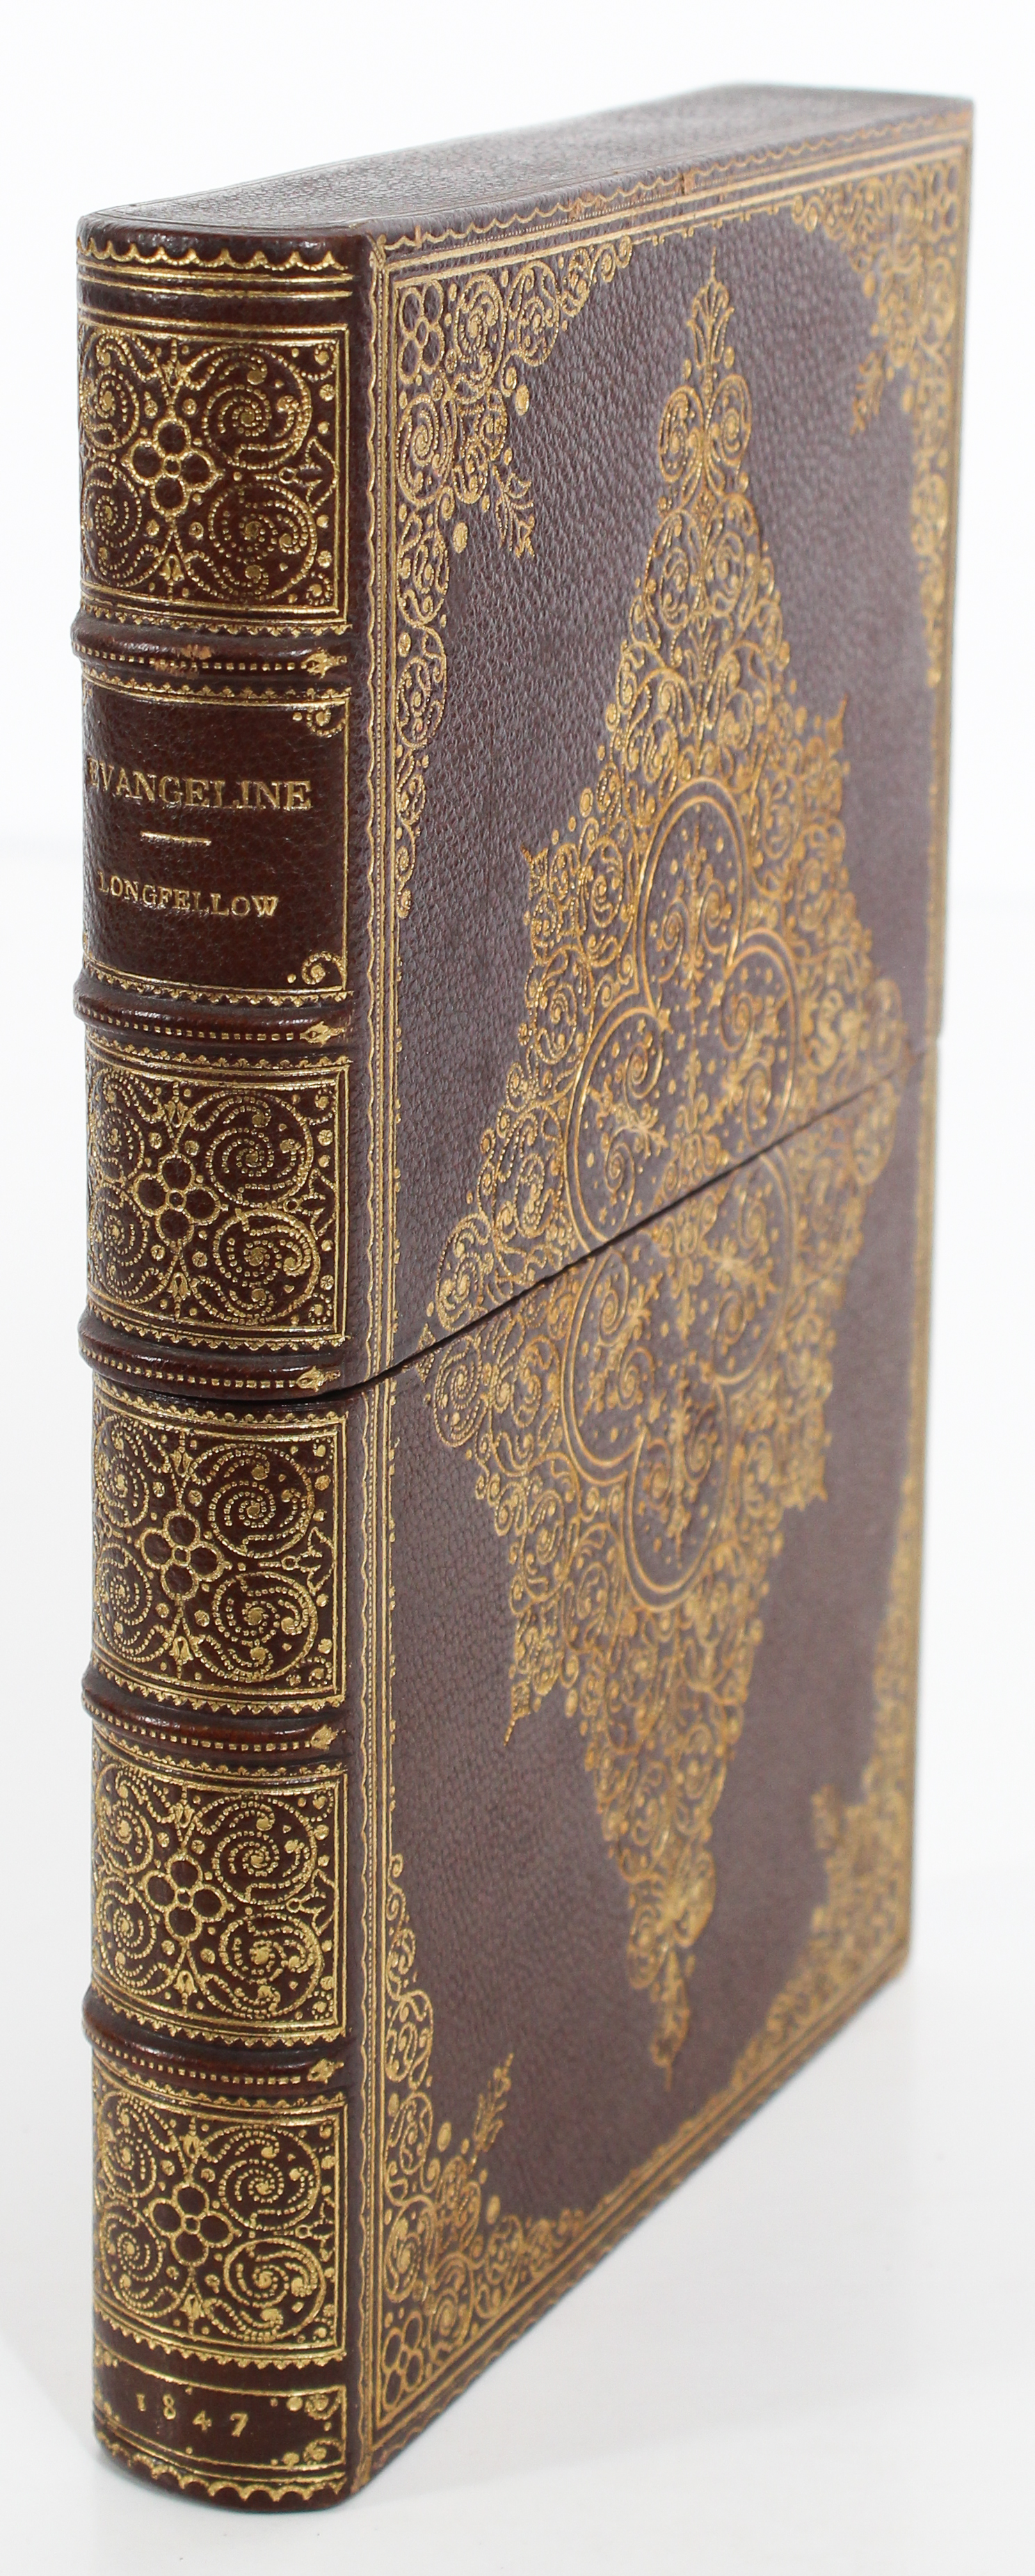 Evangeline, Longfellow, First Ed 1847 with Letter